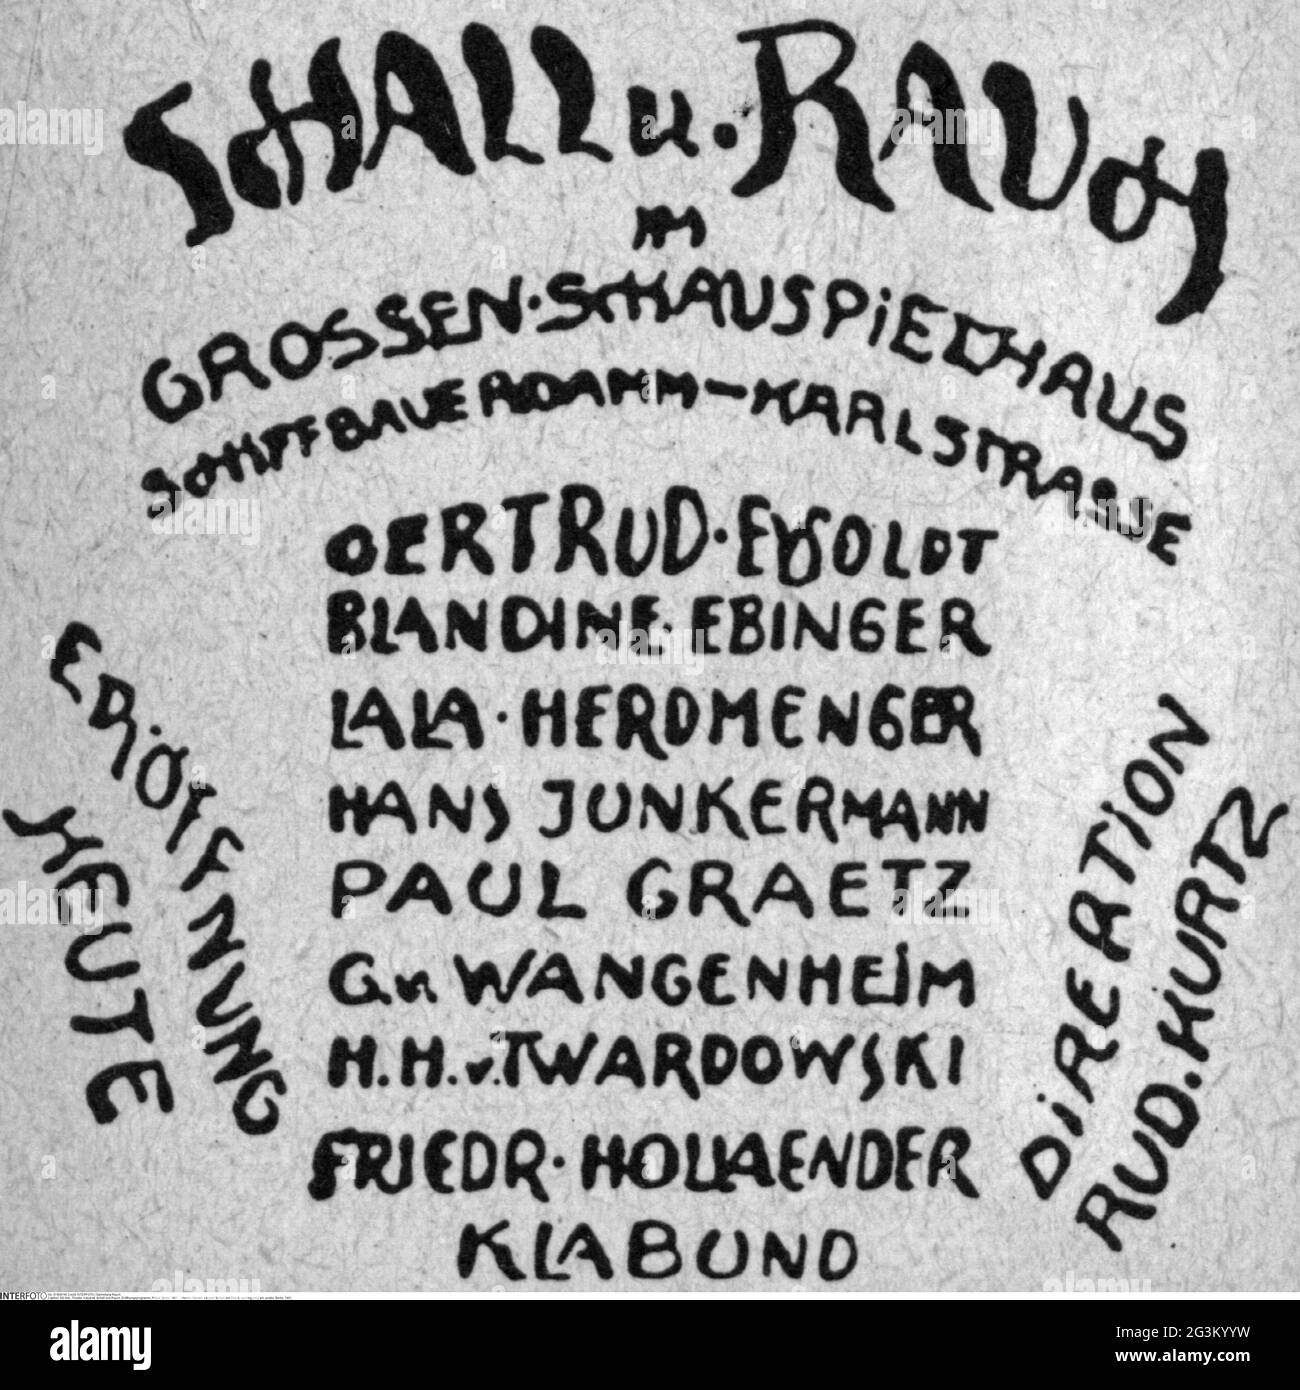 theatre / theater, cabaret, Schall und Rauch, opening program, poster, Berlin, 1901, ARTIST'S COPYRIGHT HAS NOT TO BE CLEARED Stock Photo